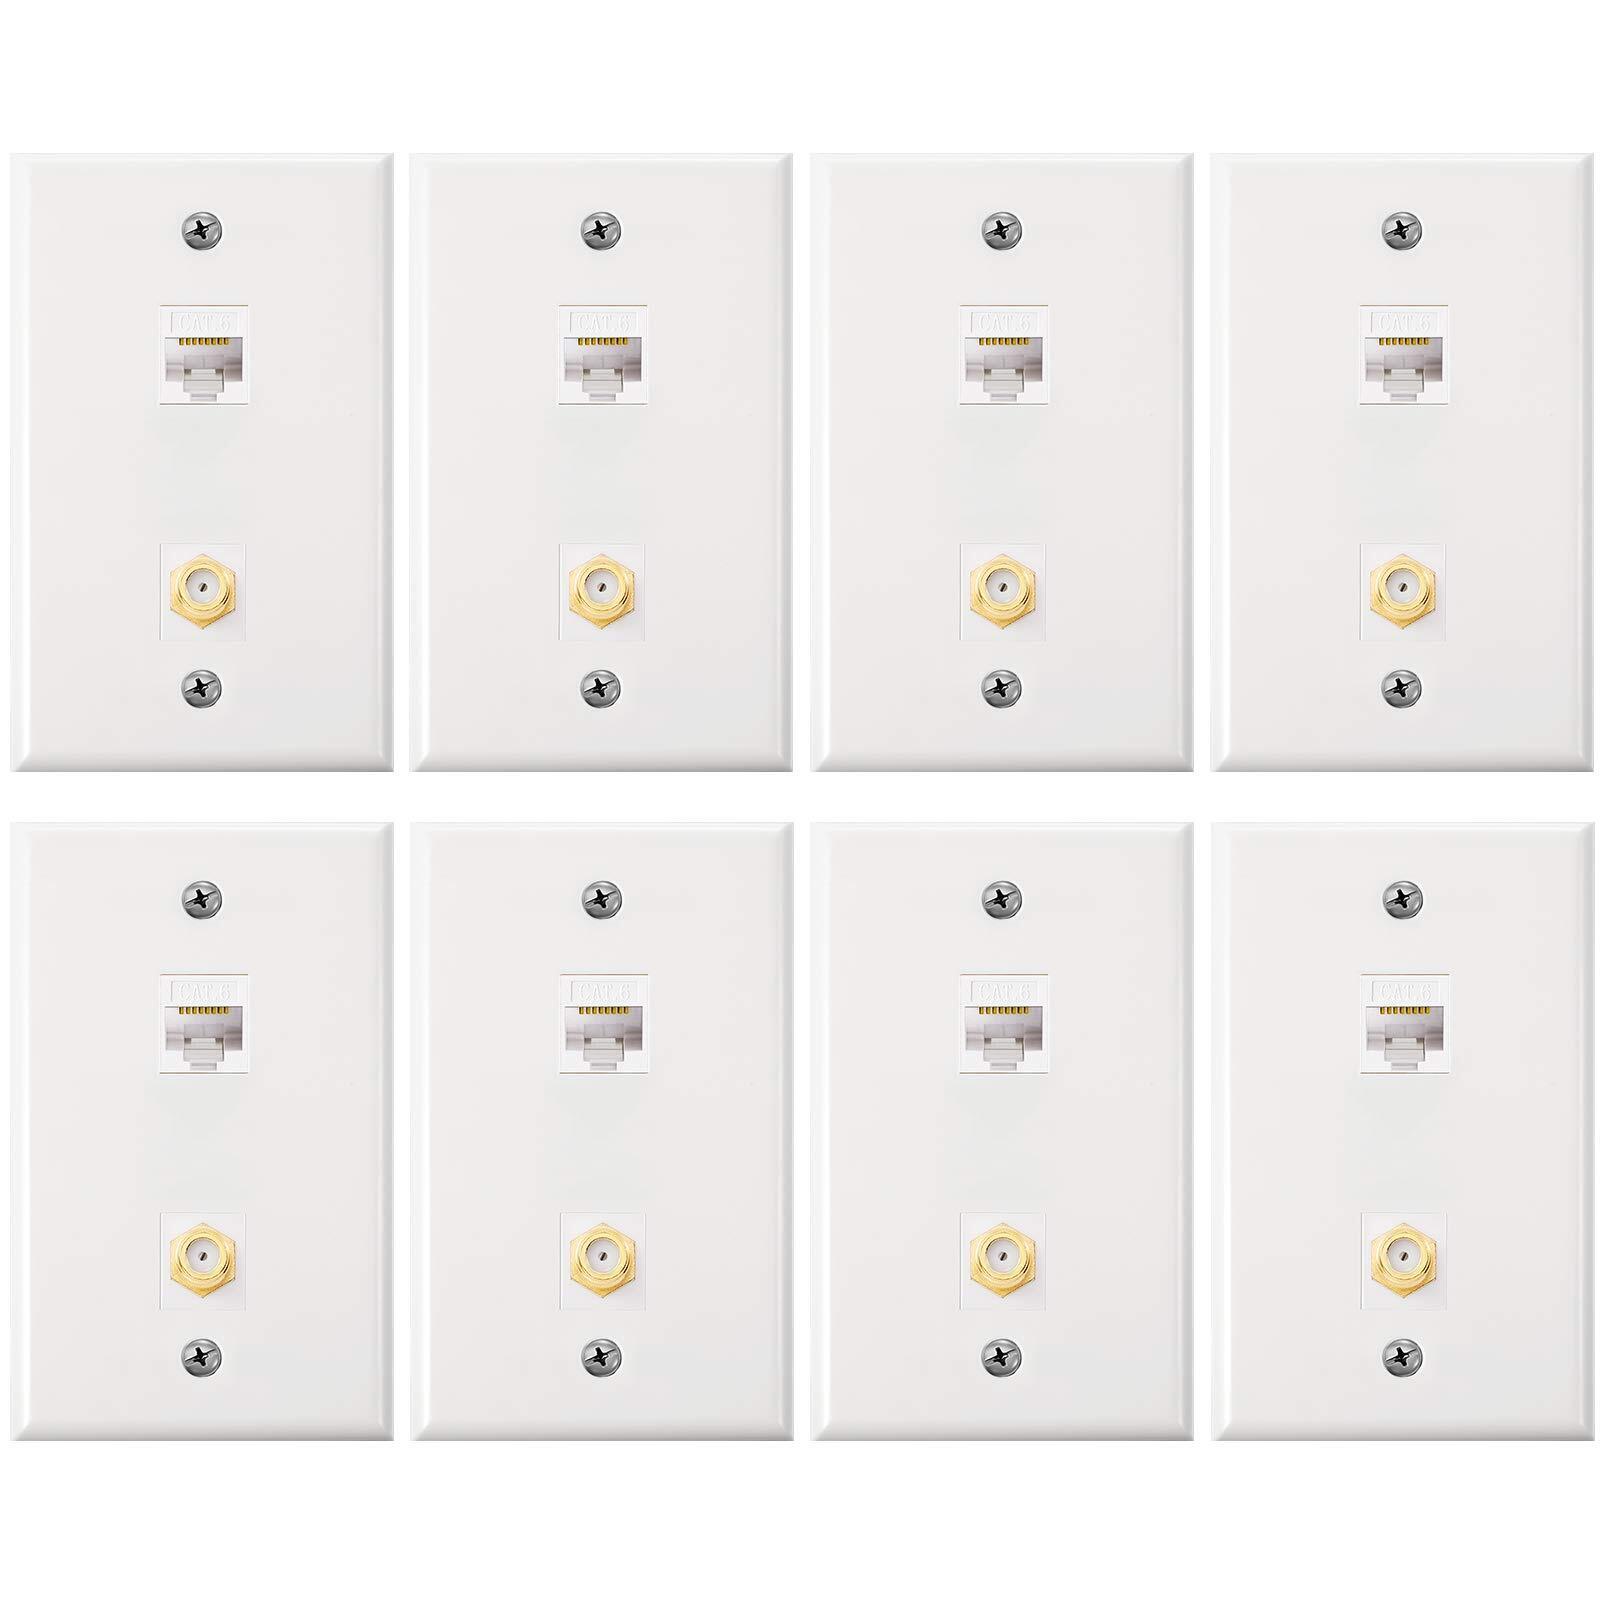 8 Pack Cat 6 Ethernet Wall Plates Cat 6 Coax Wall Plate with Ethernet Port an...